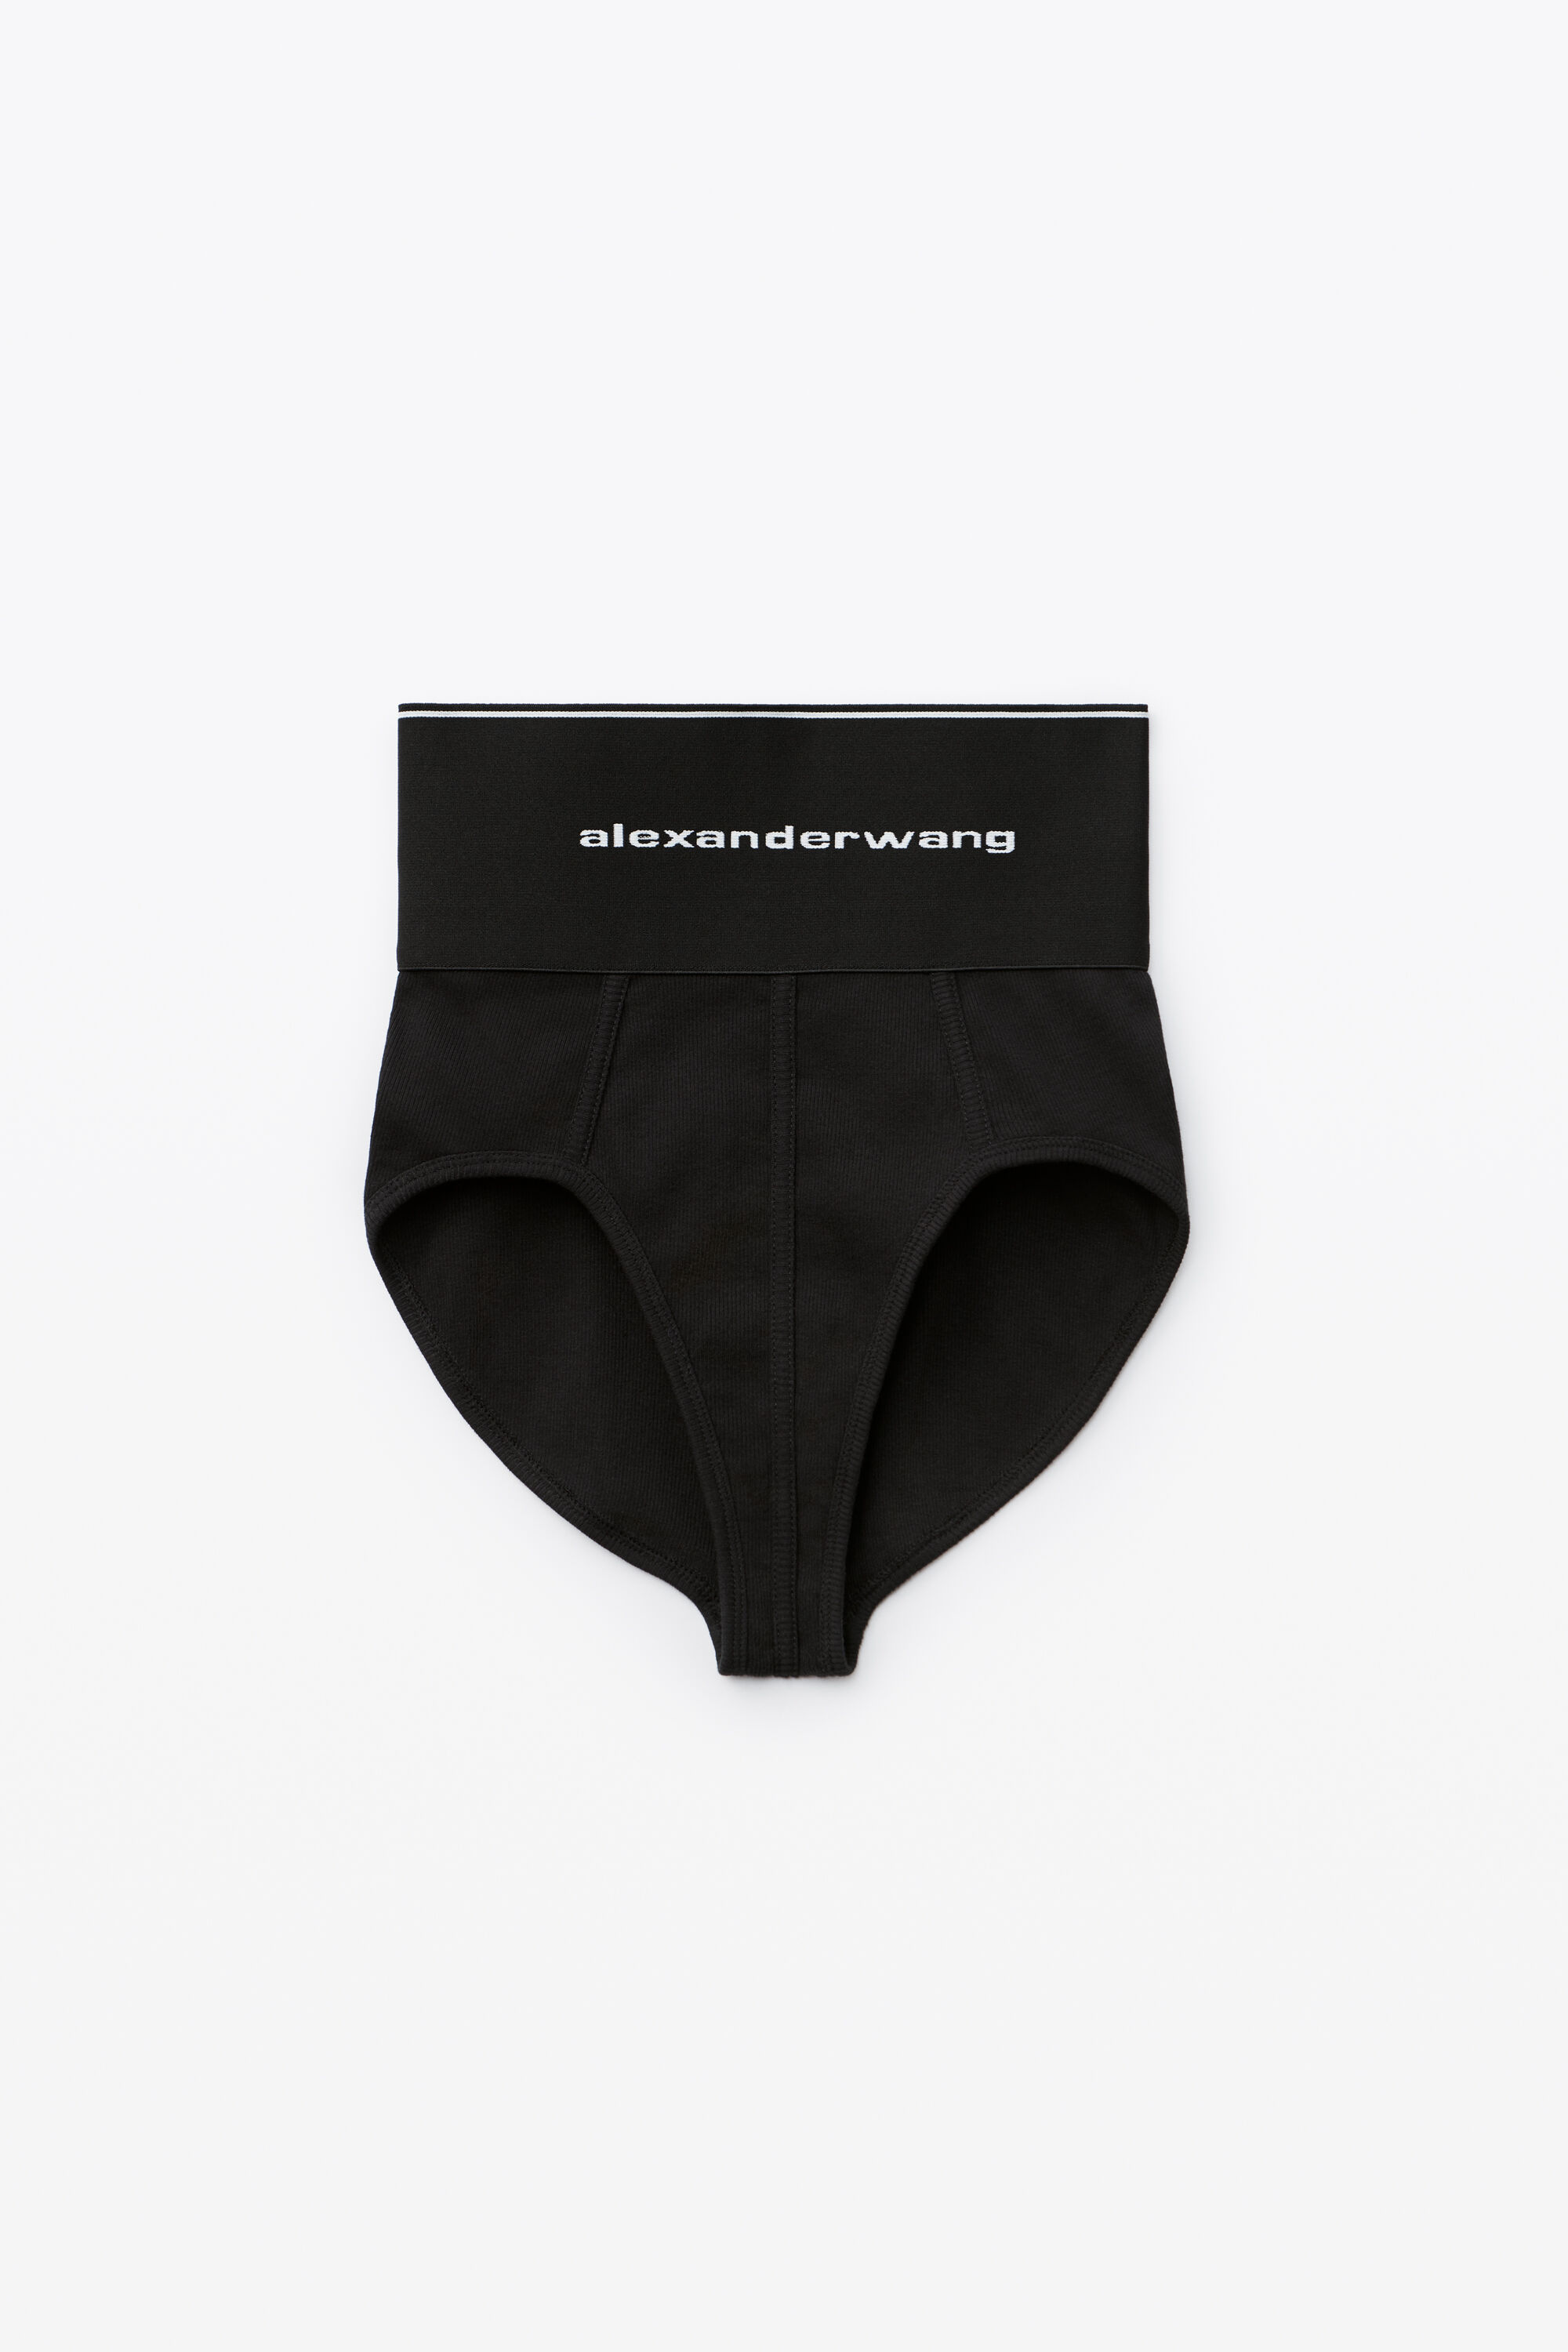 alexanderwang | Wang Graphics - clothing and accessories from